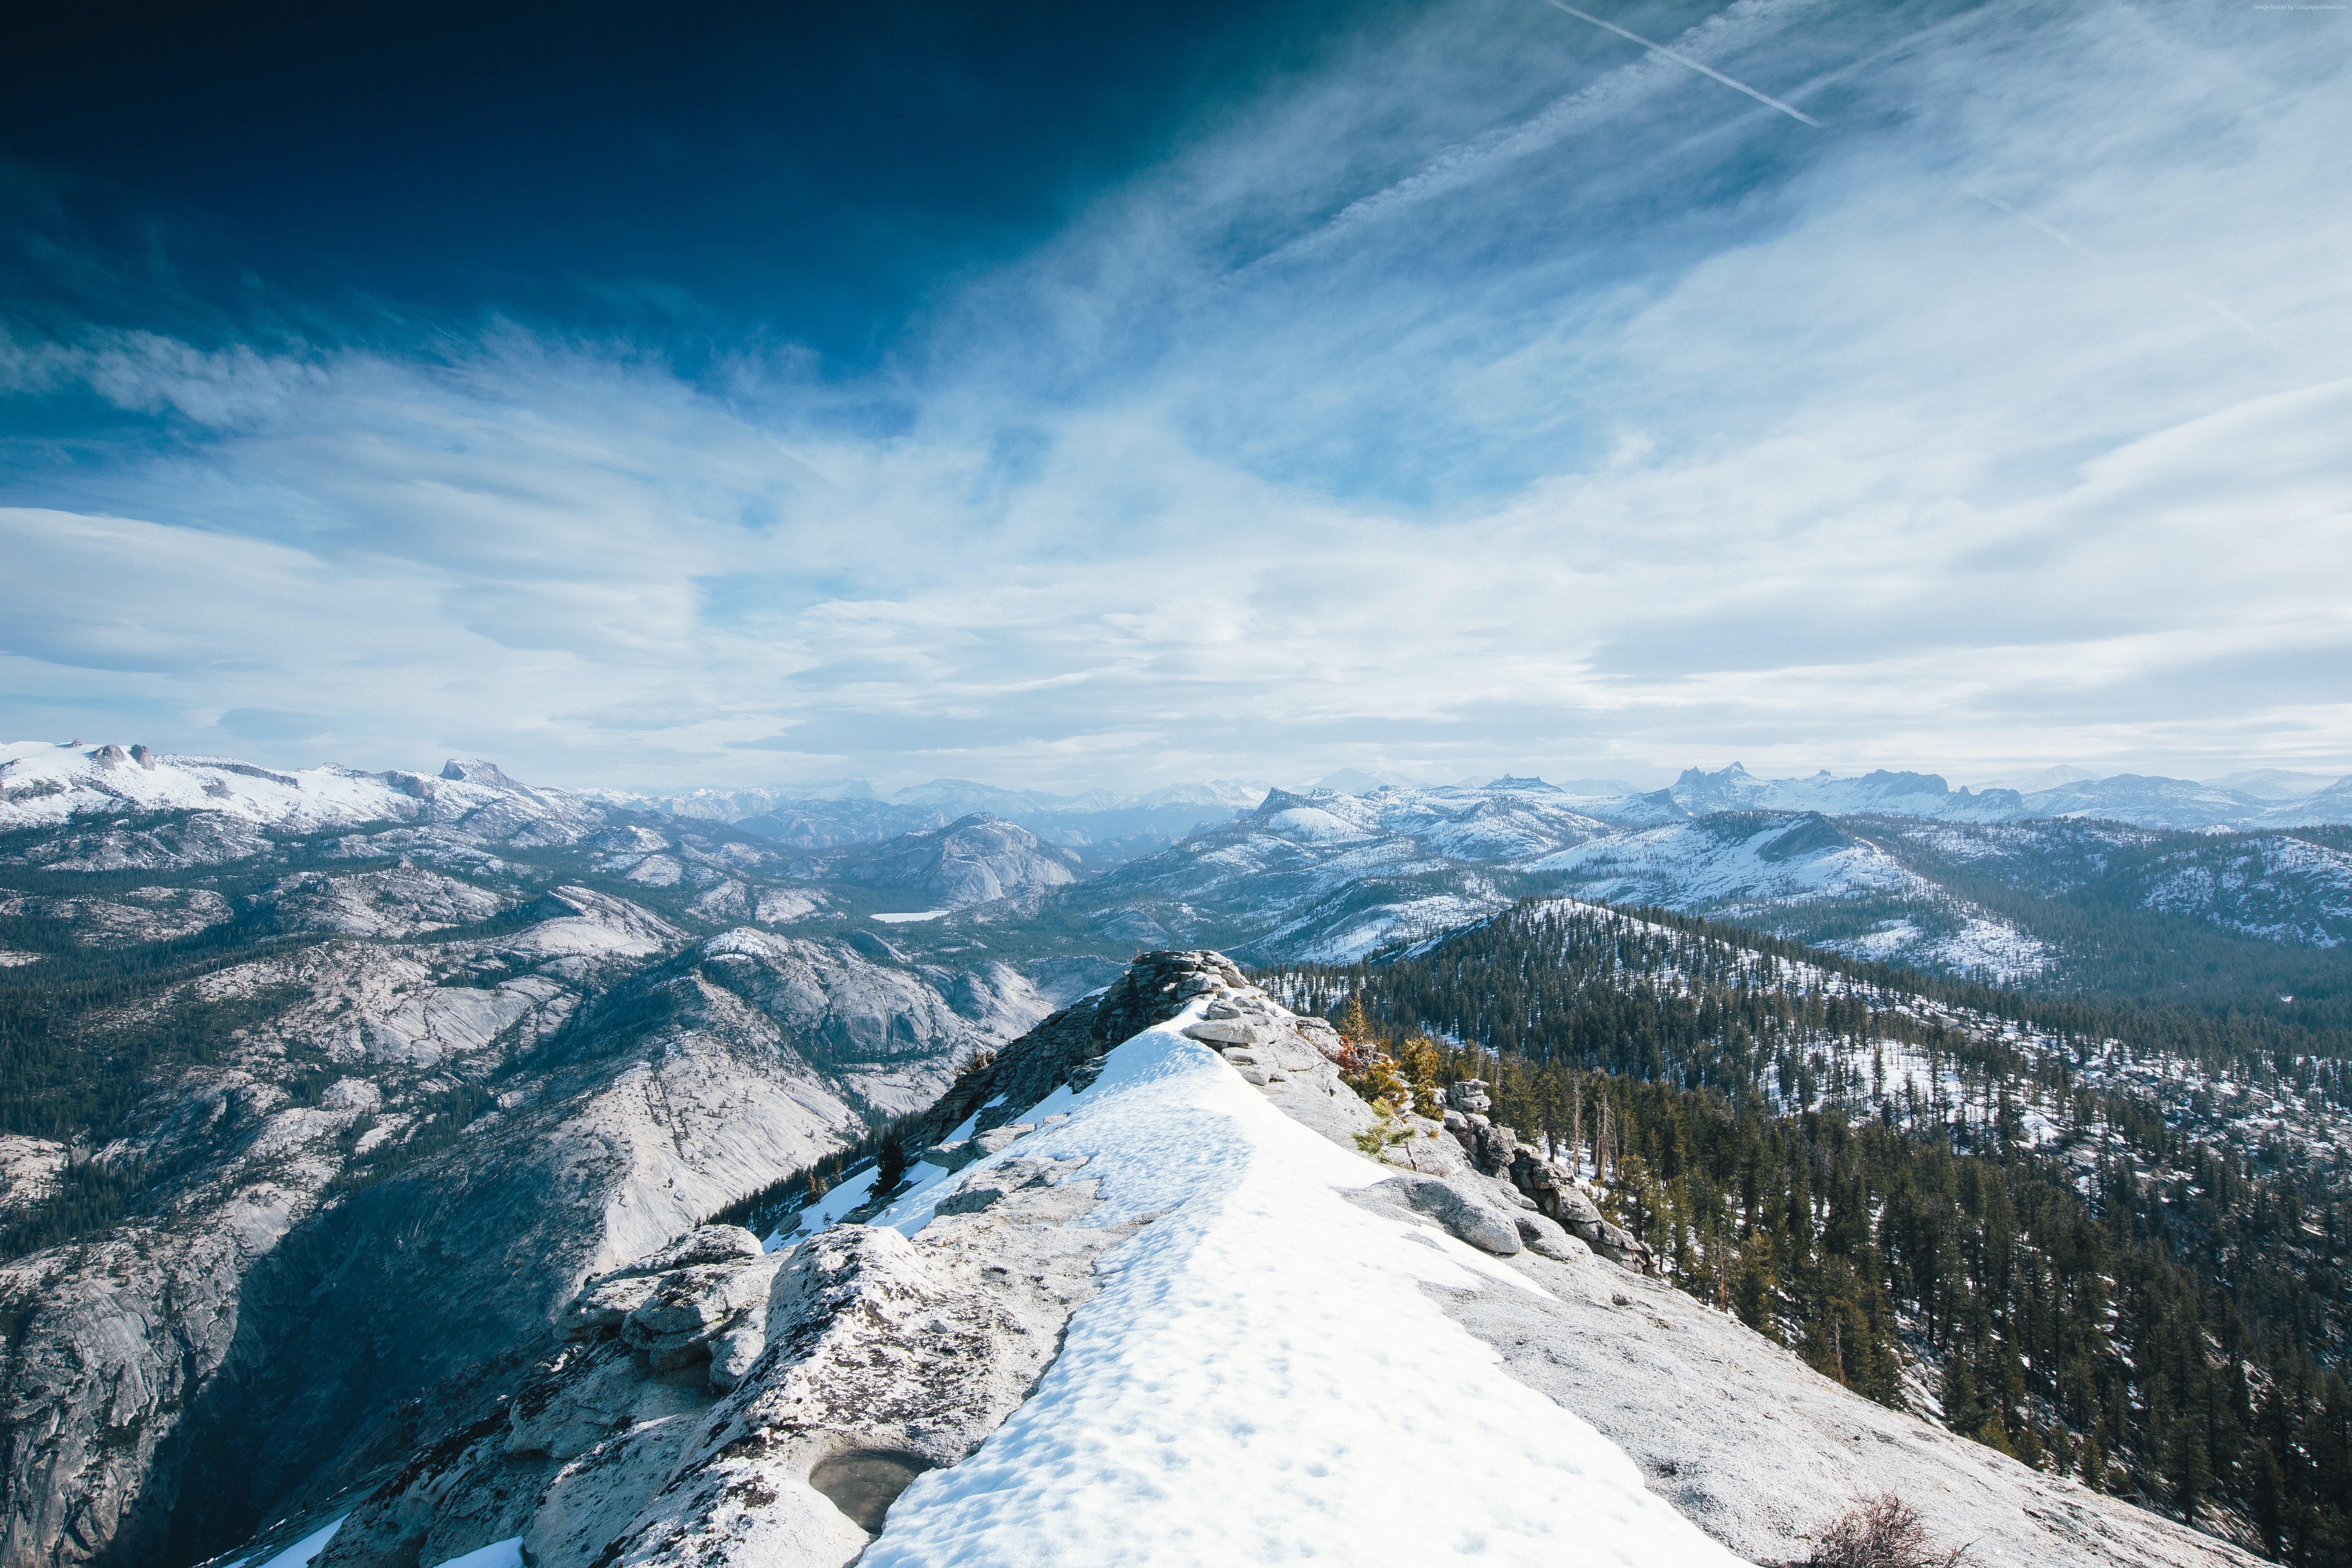  Yosemite 5k wallpapers winter snow forest OSX apple mountains